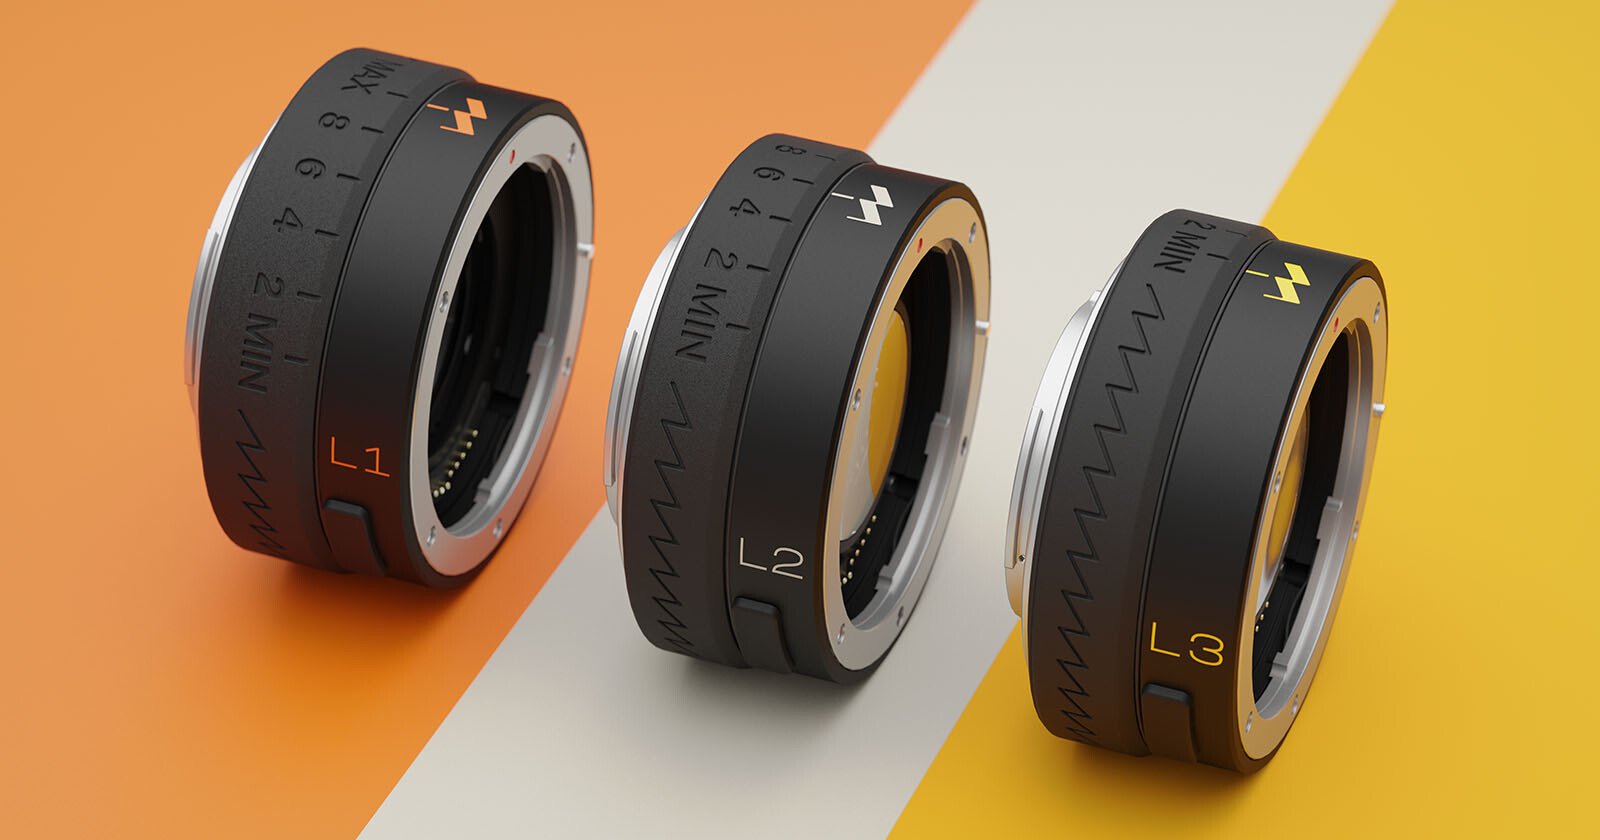 The Tuner by Module 8 is Worlds First Variable-Look Cinematic Lens System